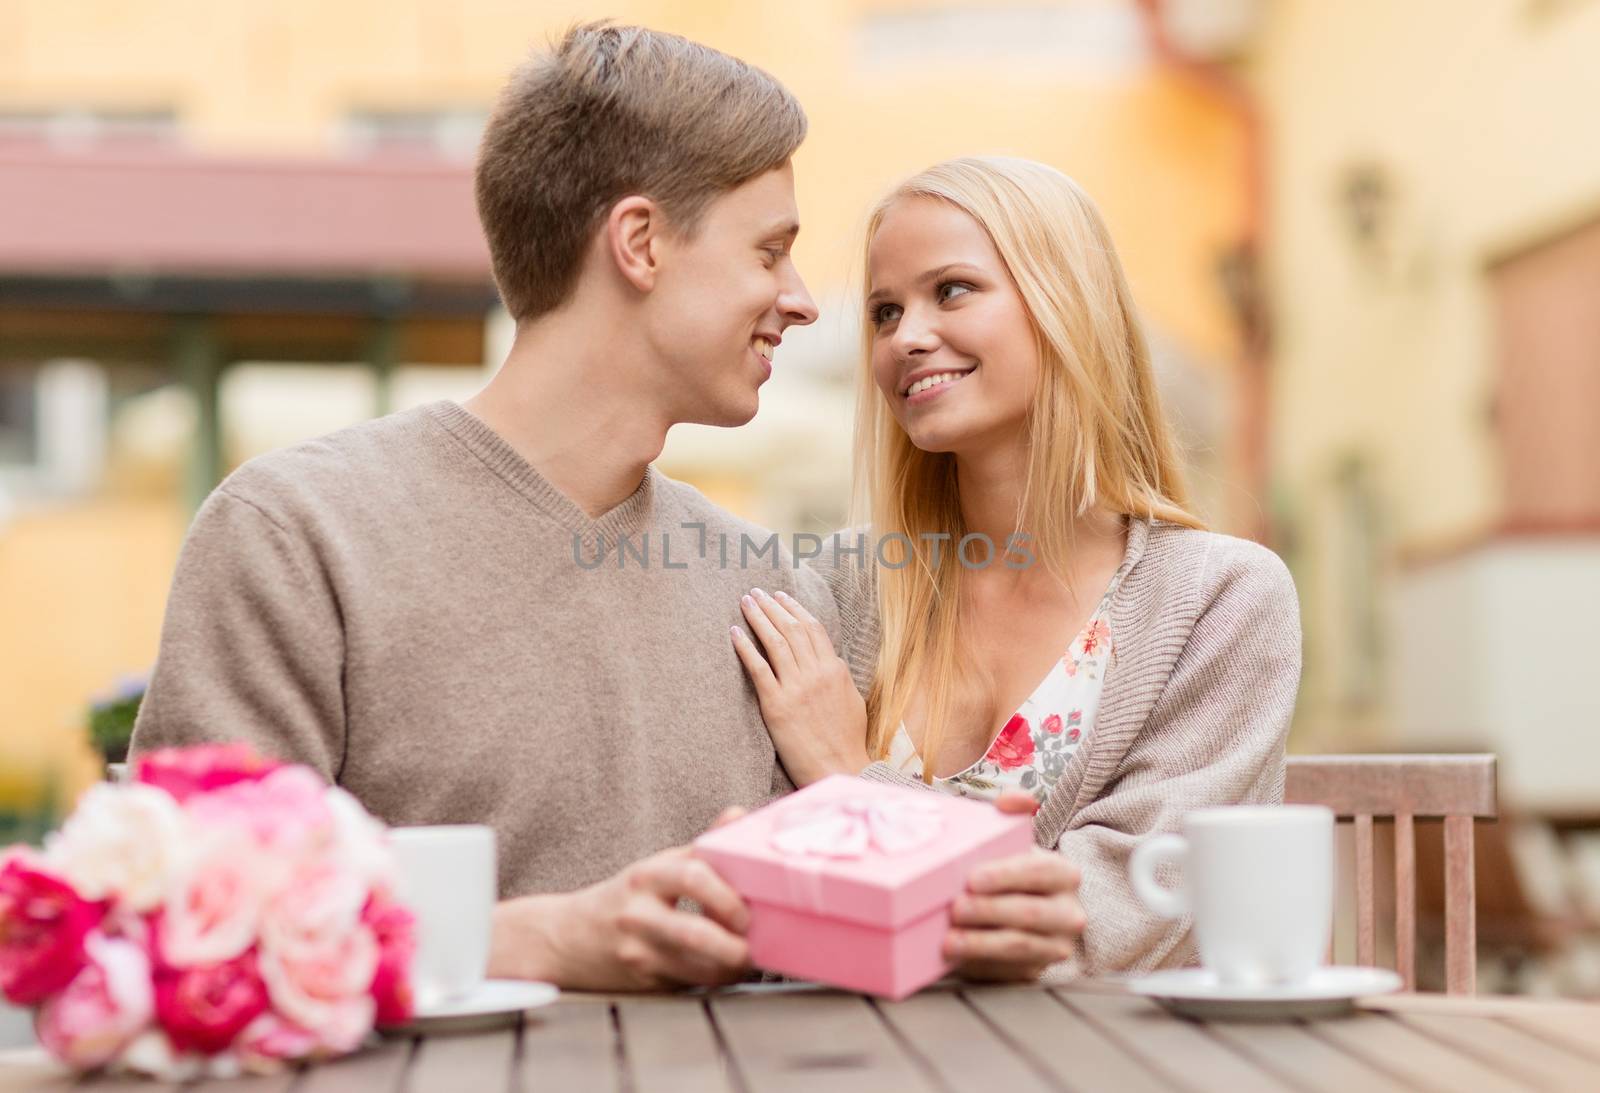 summer holidays, love, travel, tourism, relationship and dating concept - romantic happy couple with gift in the cafe